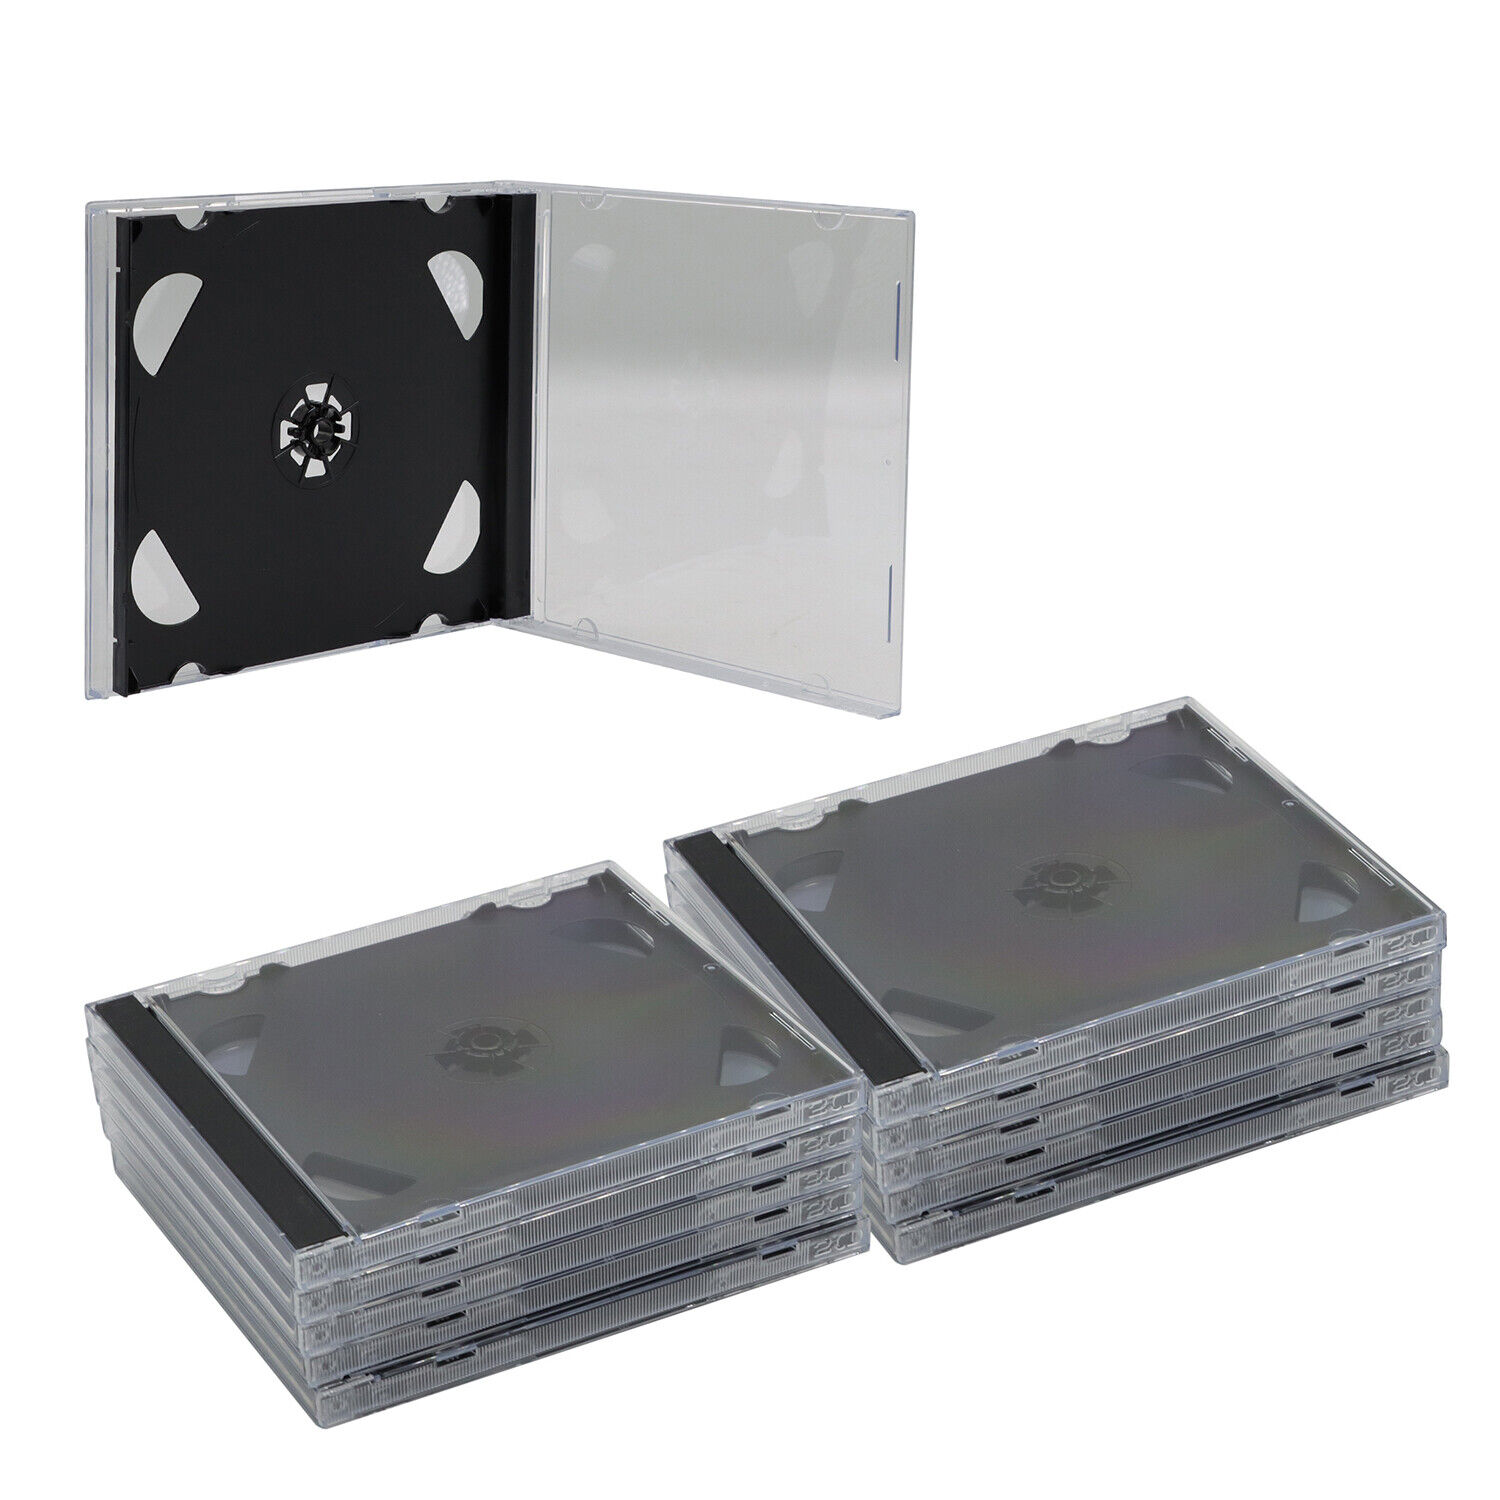 10PC STANDARD Double CD Jewel Case with Tray 10.4mm (2 CD) Lots Protectors Cover